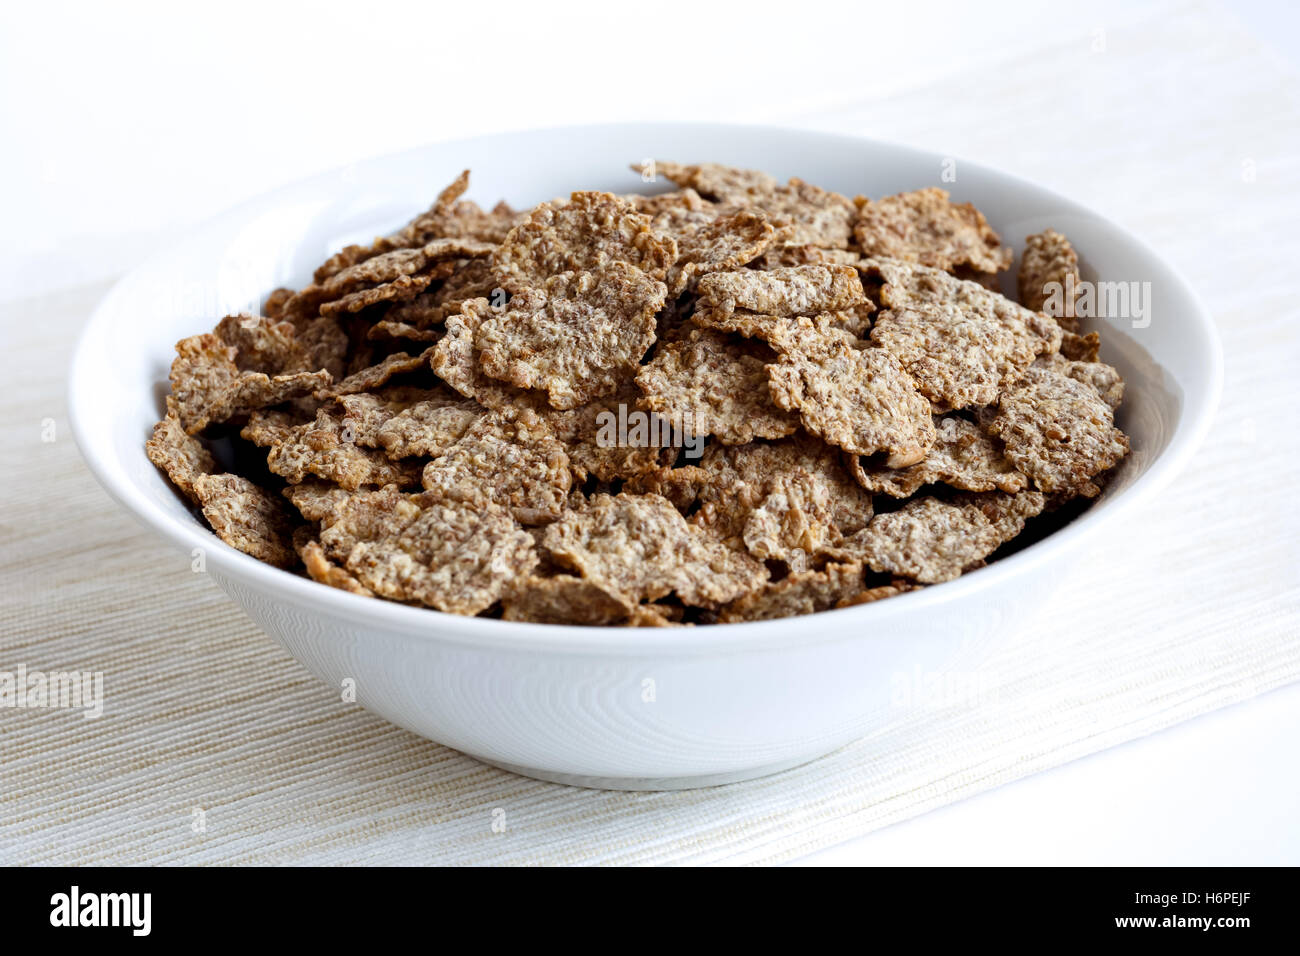 Wheat bran breakfast cereal with no milk in a bowl. On natural beige coloured textured napkin. On white background. Stock Photo